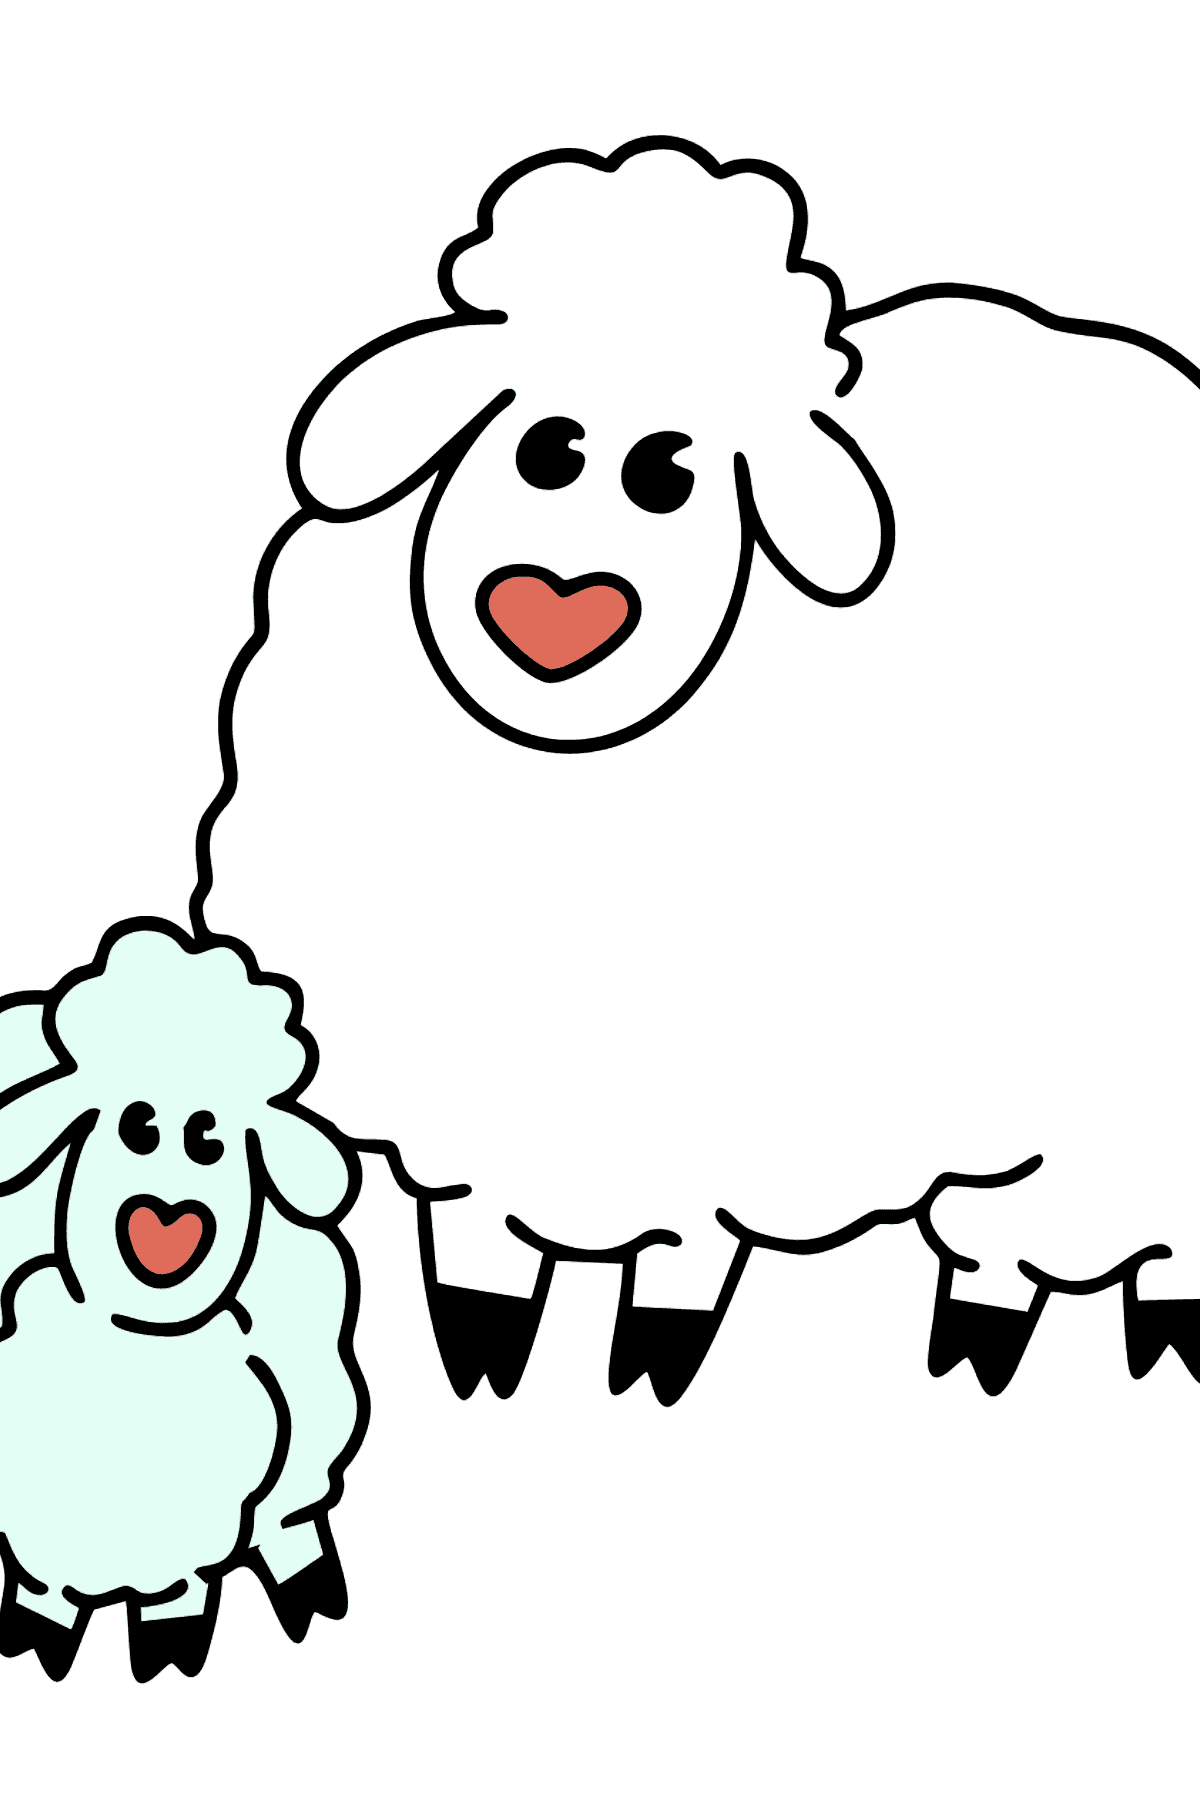 Sheep with Lamb coloring page - Coloring Pages for Kids